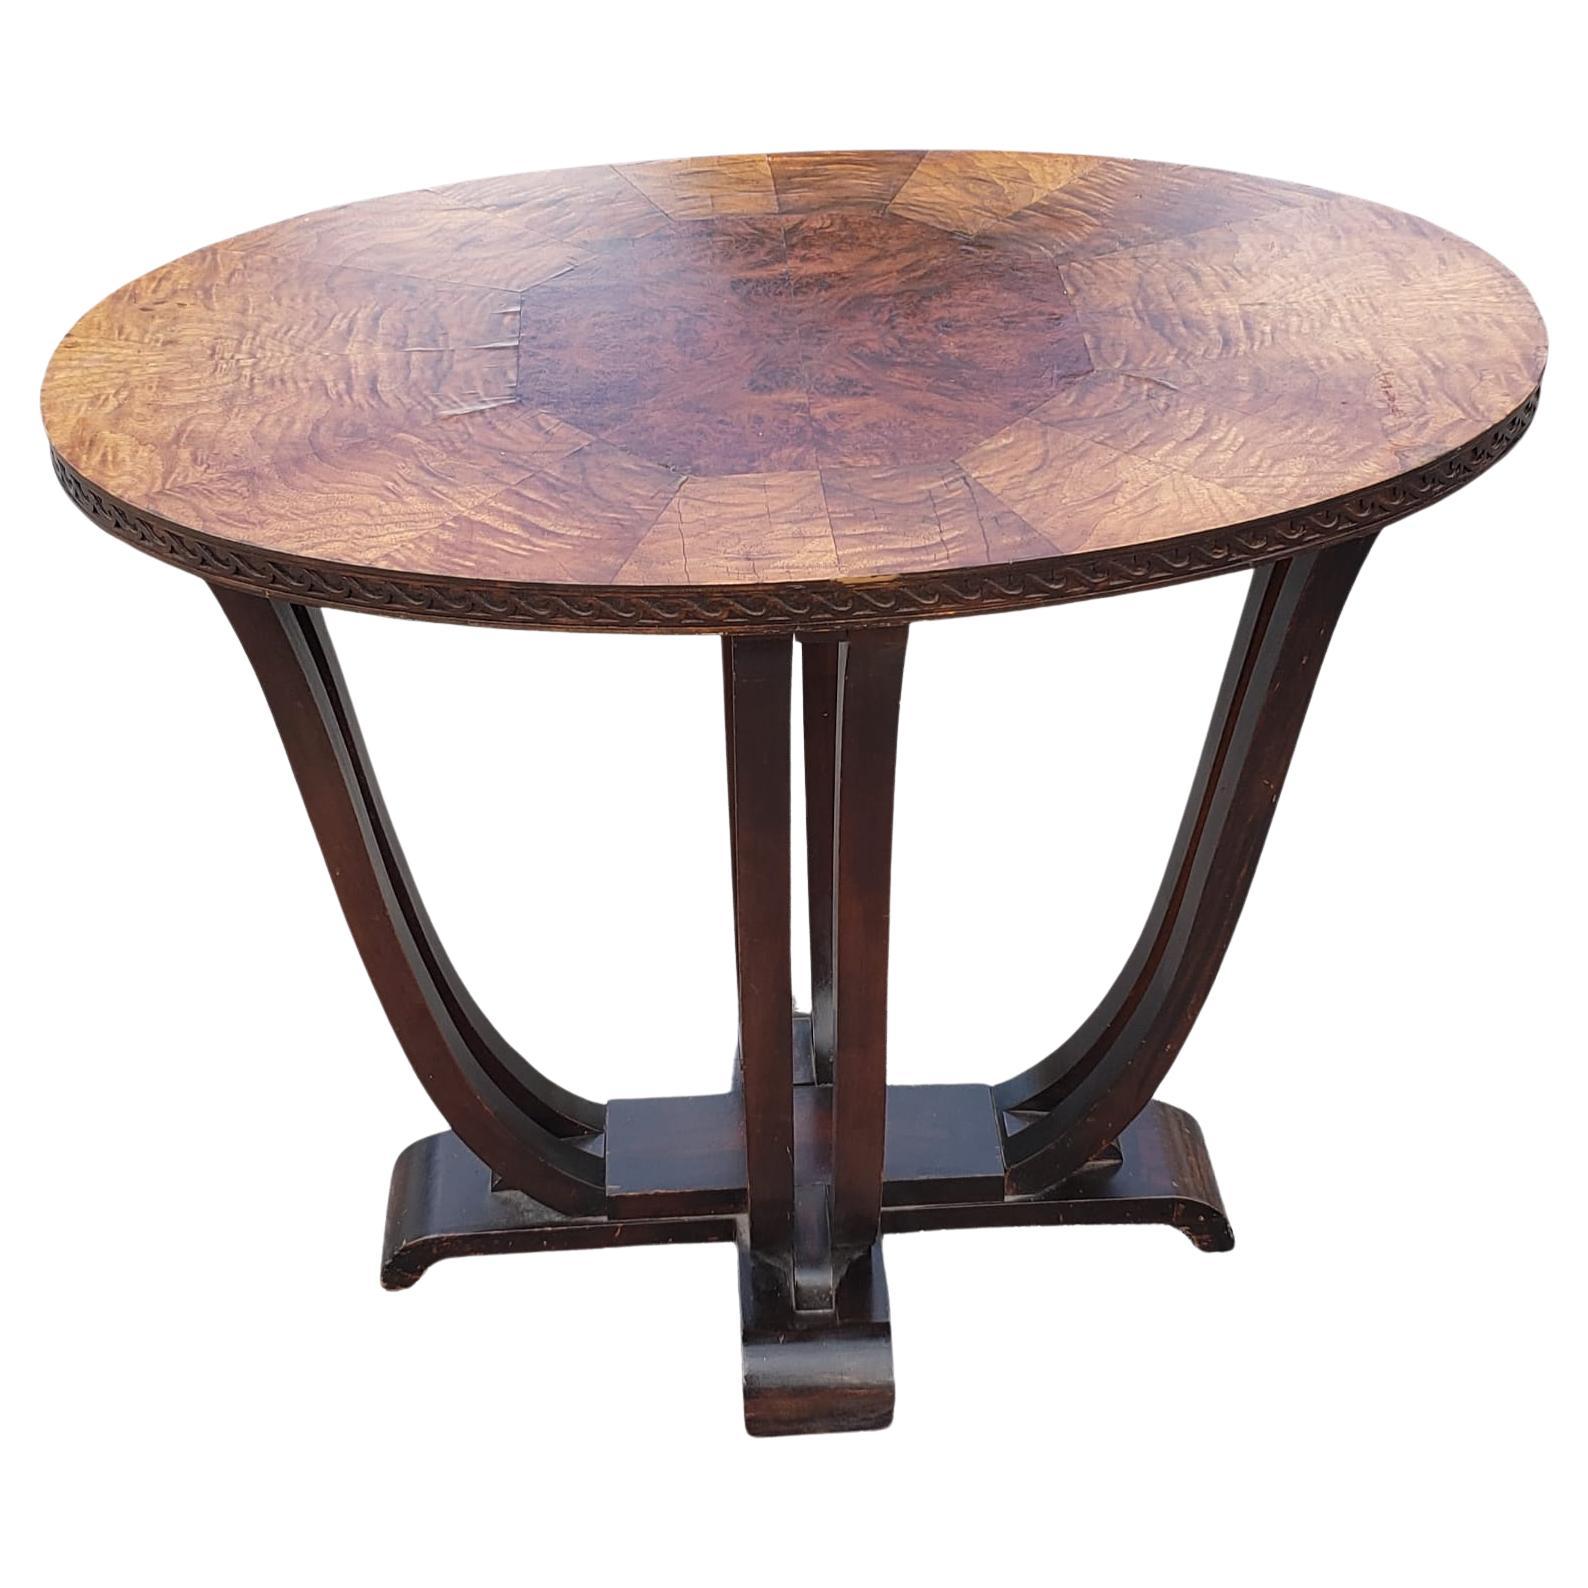 Early 20th Century Burl Walnut Oval Center Table or Side Table